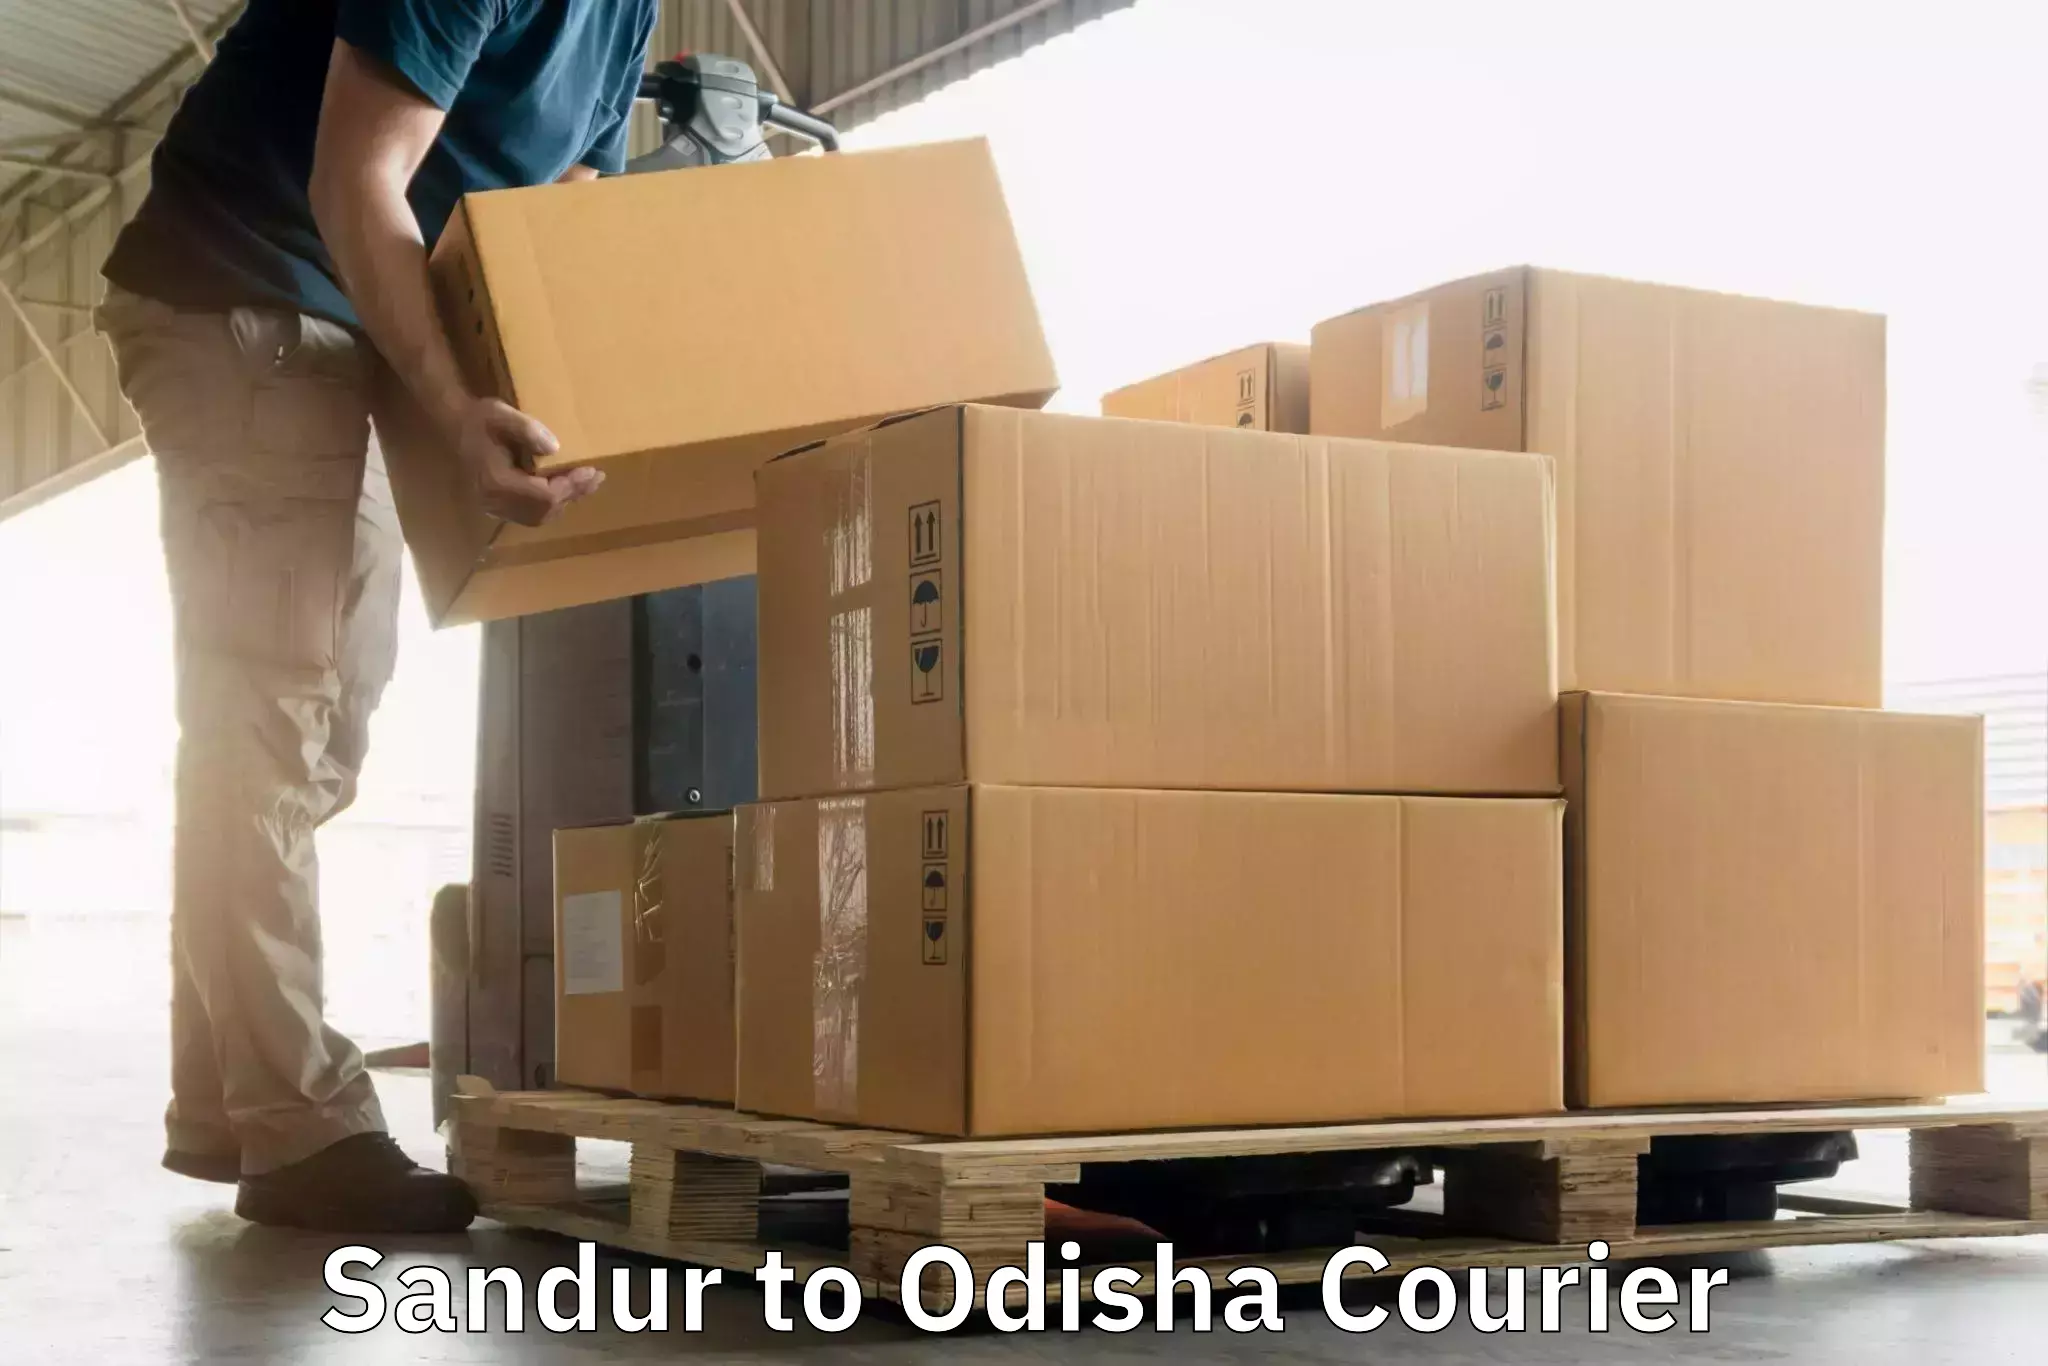 Subscription-based courier in Sandur to Bhubaneswar